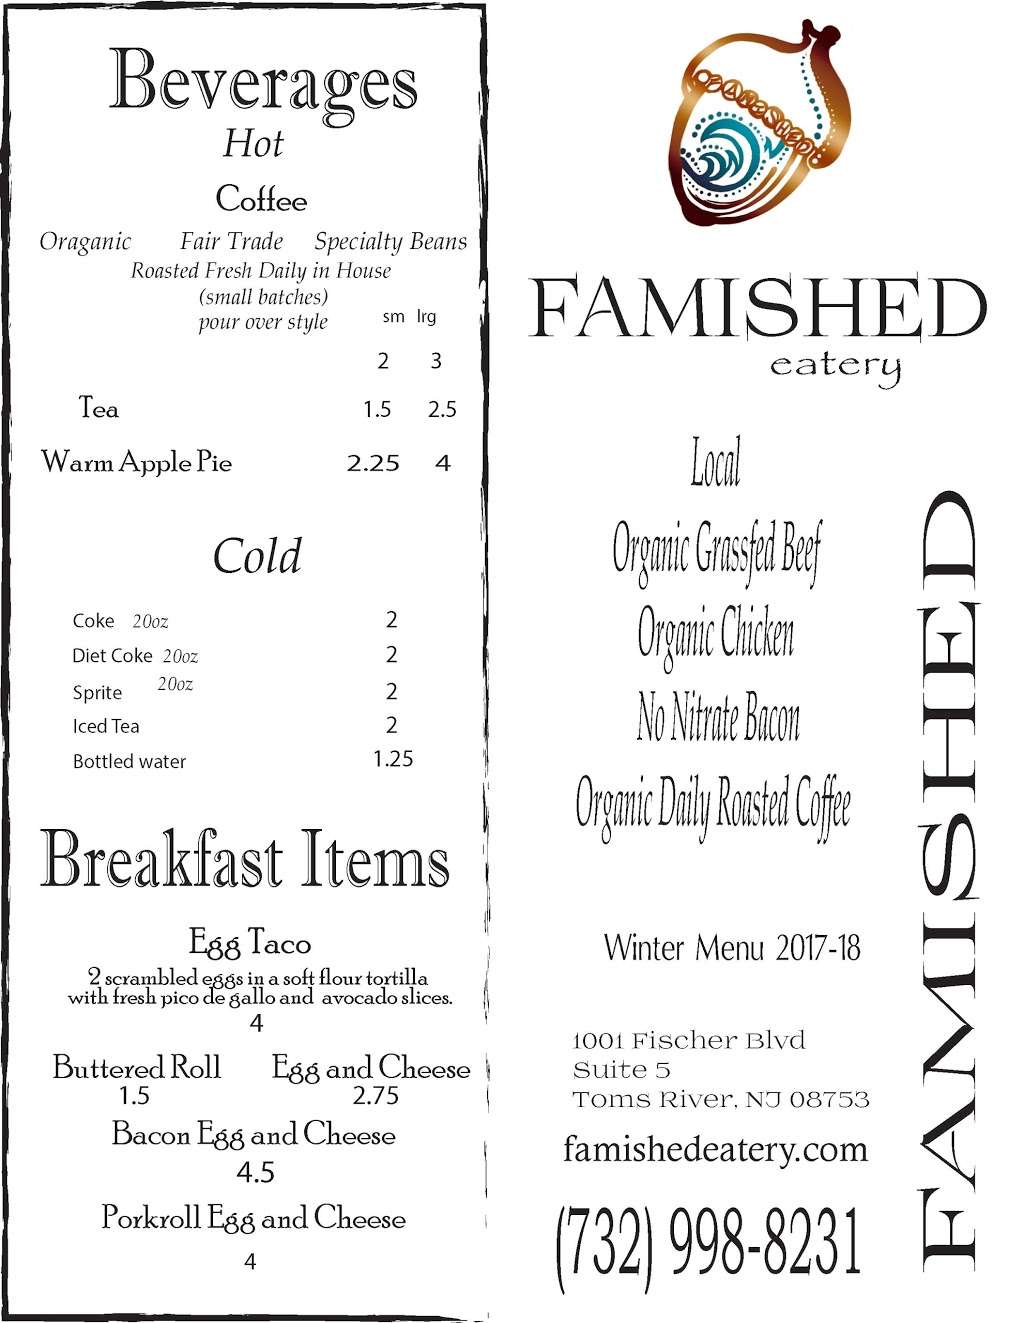 FAMISHED eatery | 3818, 1001 Fischer Blvd suite 5, Toms River, NJ 08753 | Phone: (732) 998-8231